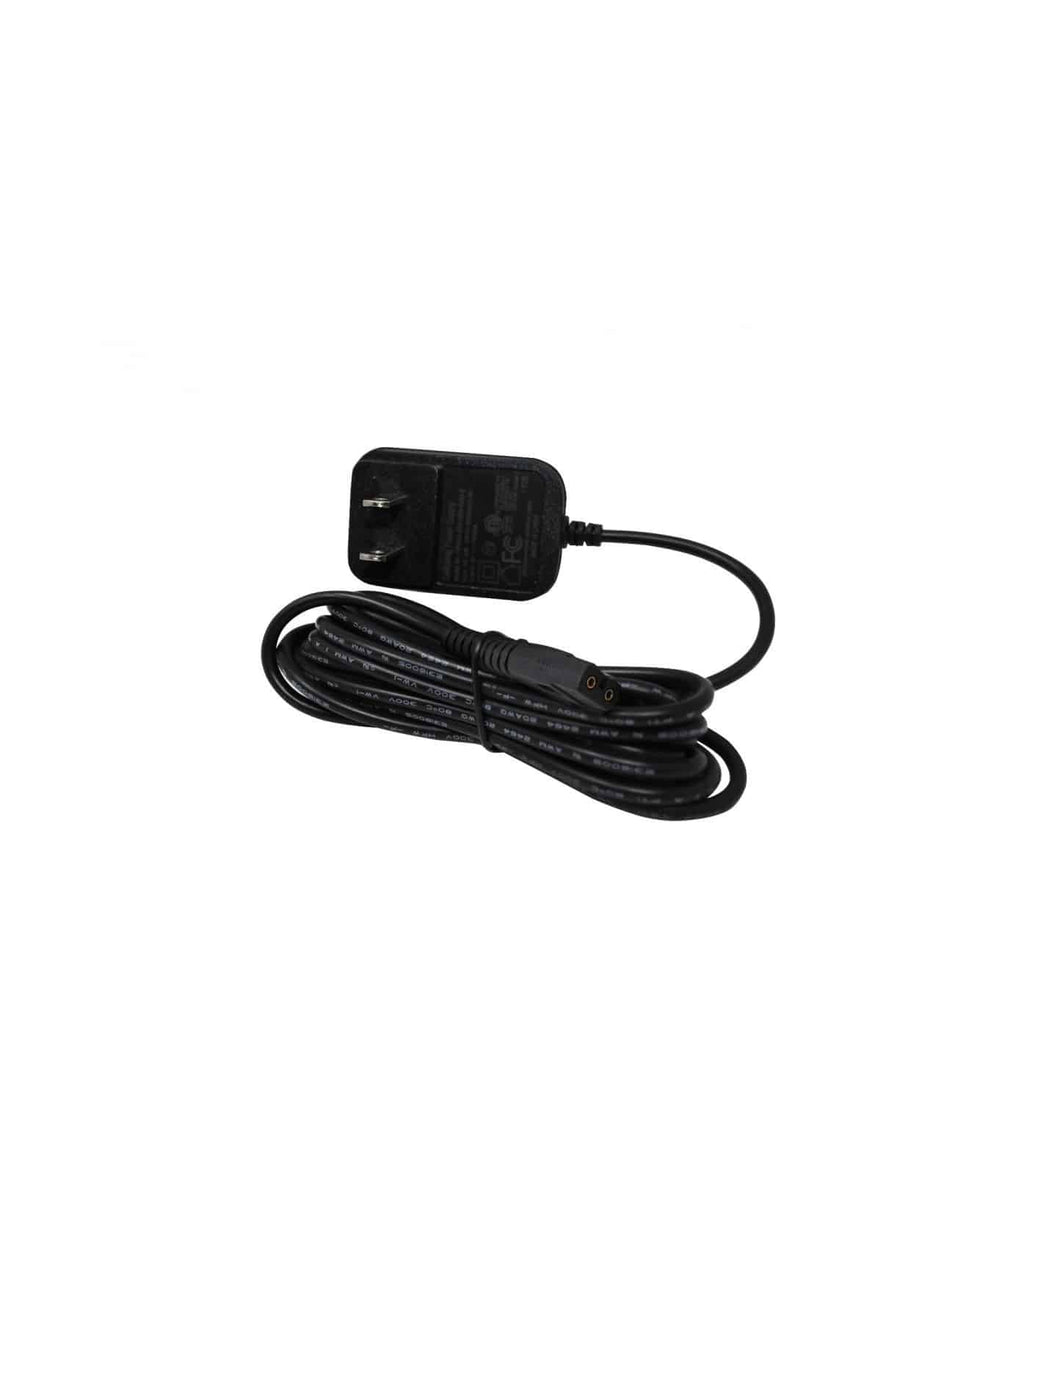 GAMMA+ & STYLECRAFT REPLACEMENT CHARGER CORD